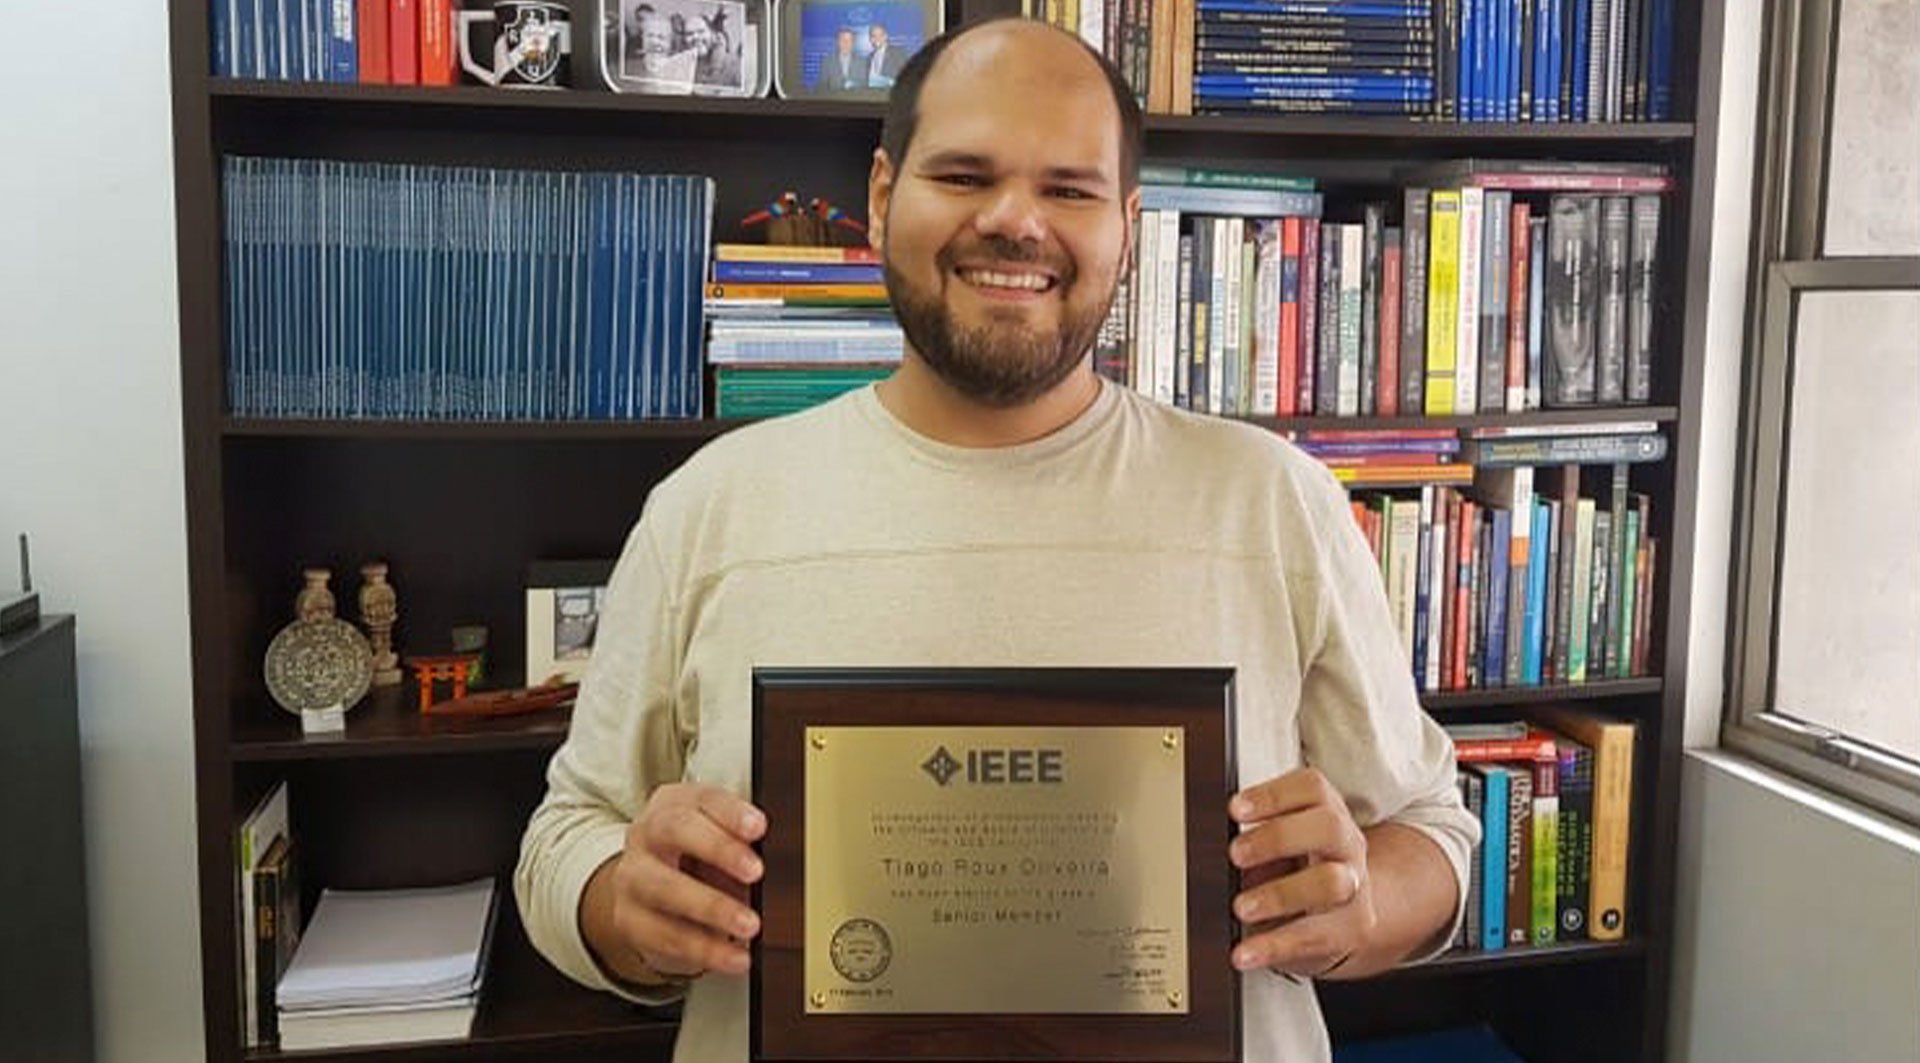 “In recognition of professional standing the Office and Board of Directors of the IEEE certify that TIAGO ROUX OLIVEIRA has been elected to the grade of SENIOR MEMBER”